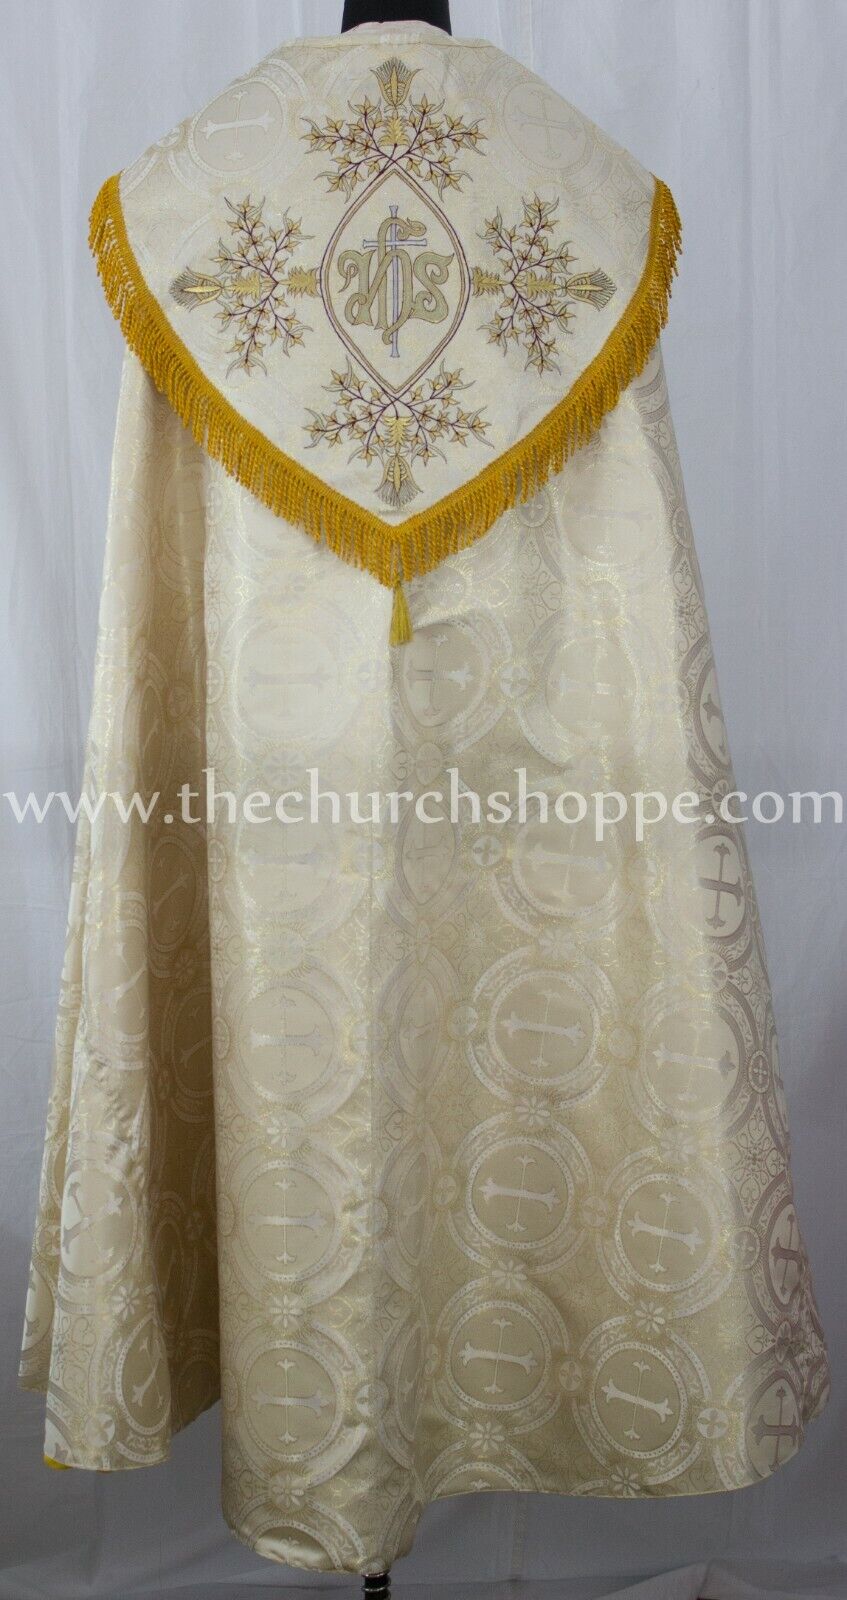 METALLIC GOLD Cope & Stole Set with IHS embroidery,capa pluvial,chape,far fronte